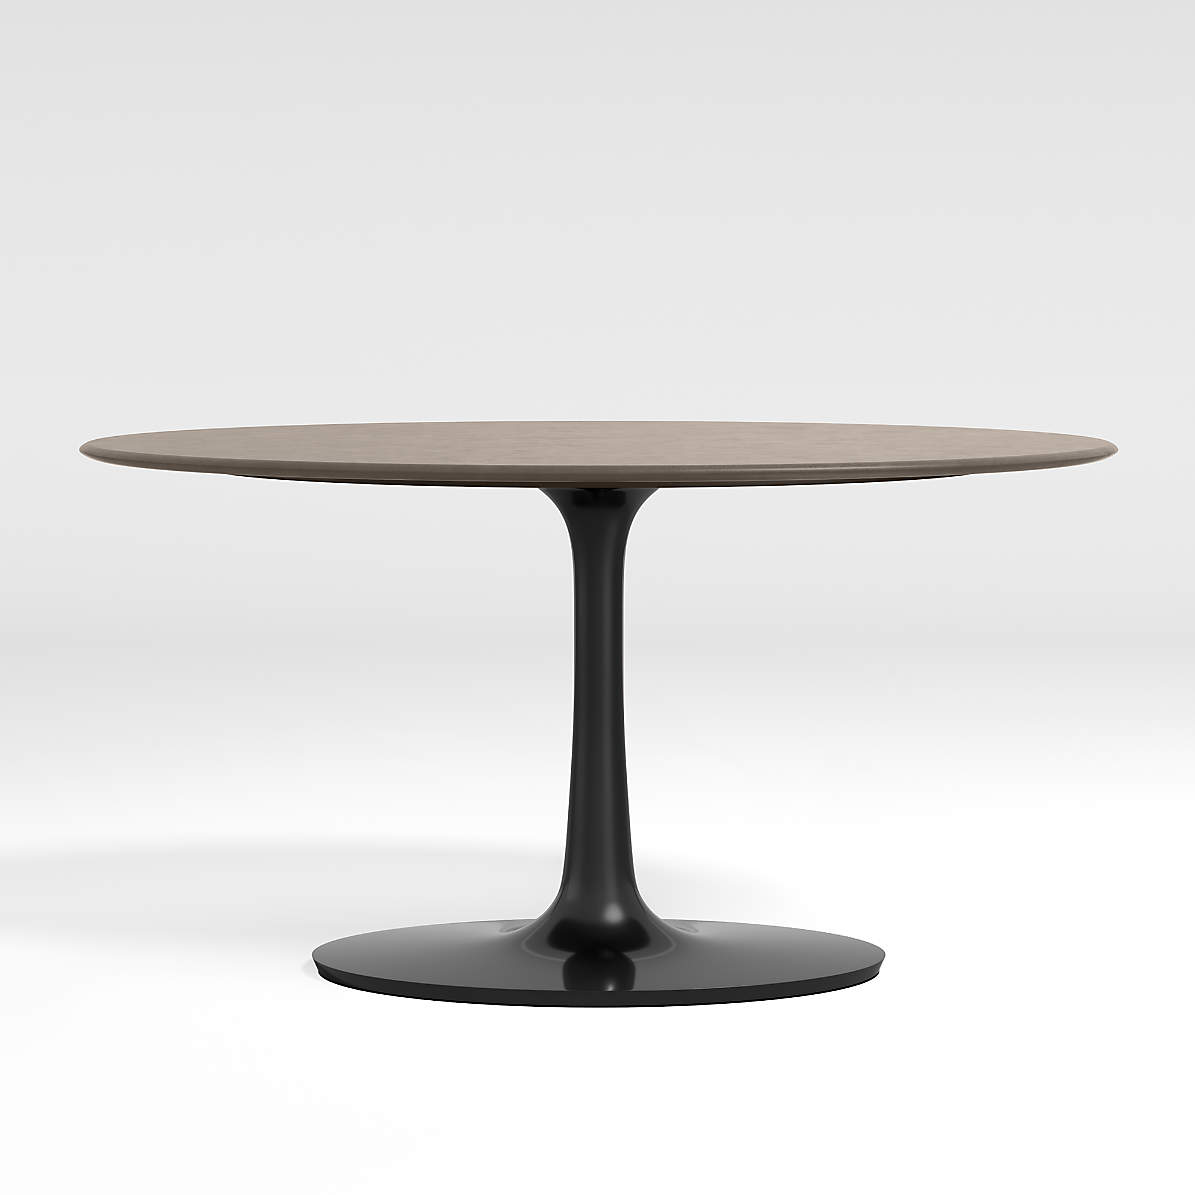 Nero Oval Concrete Top Table With Matte, Round Table Pedestal Base Black